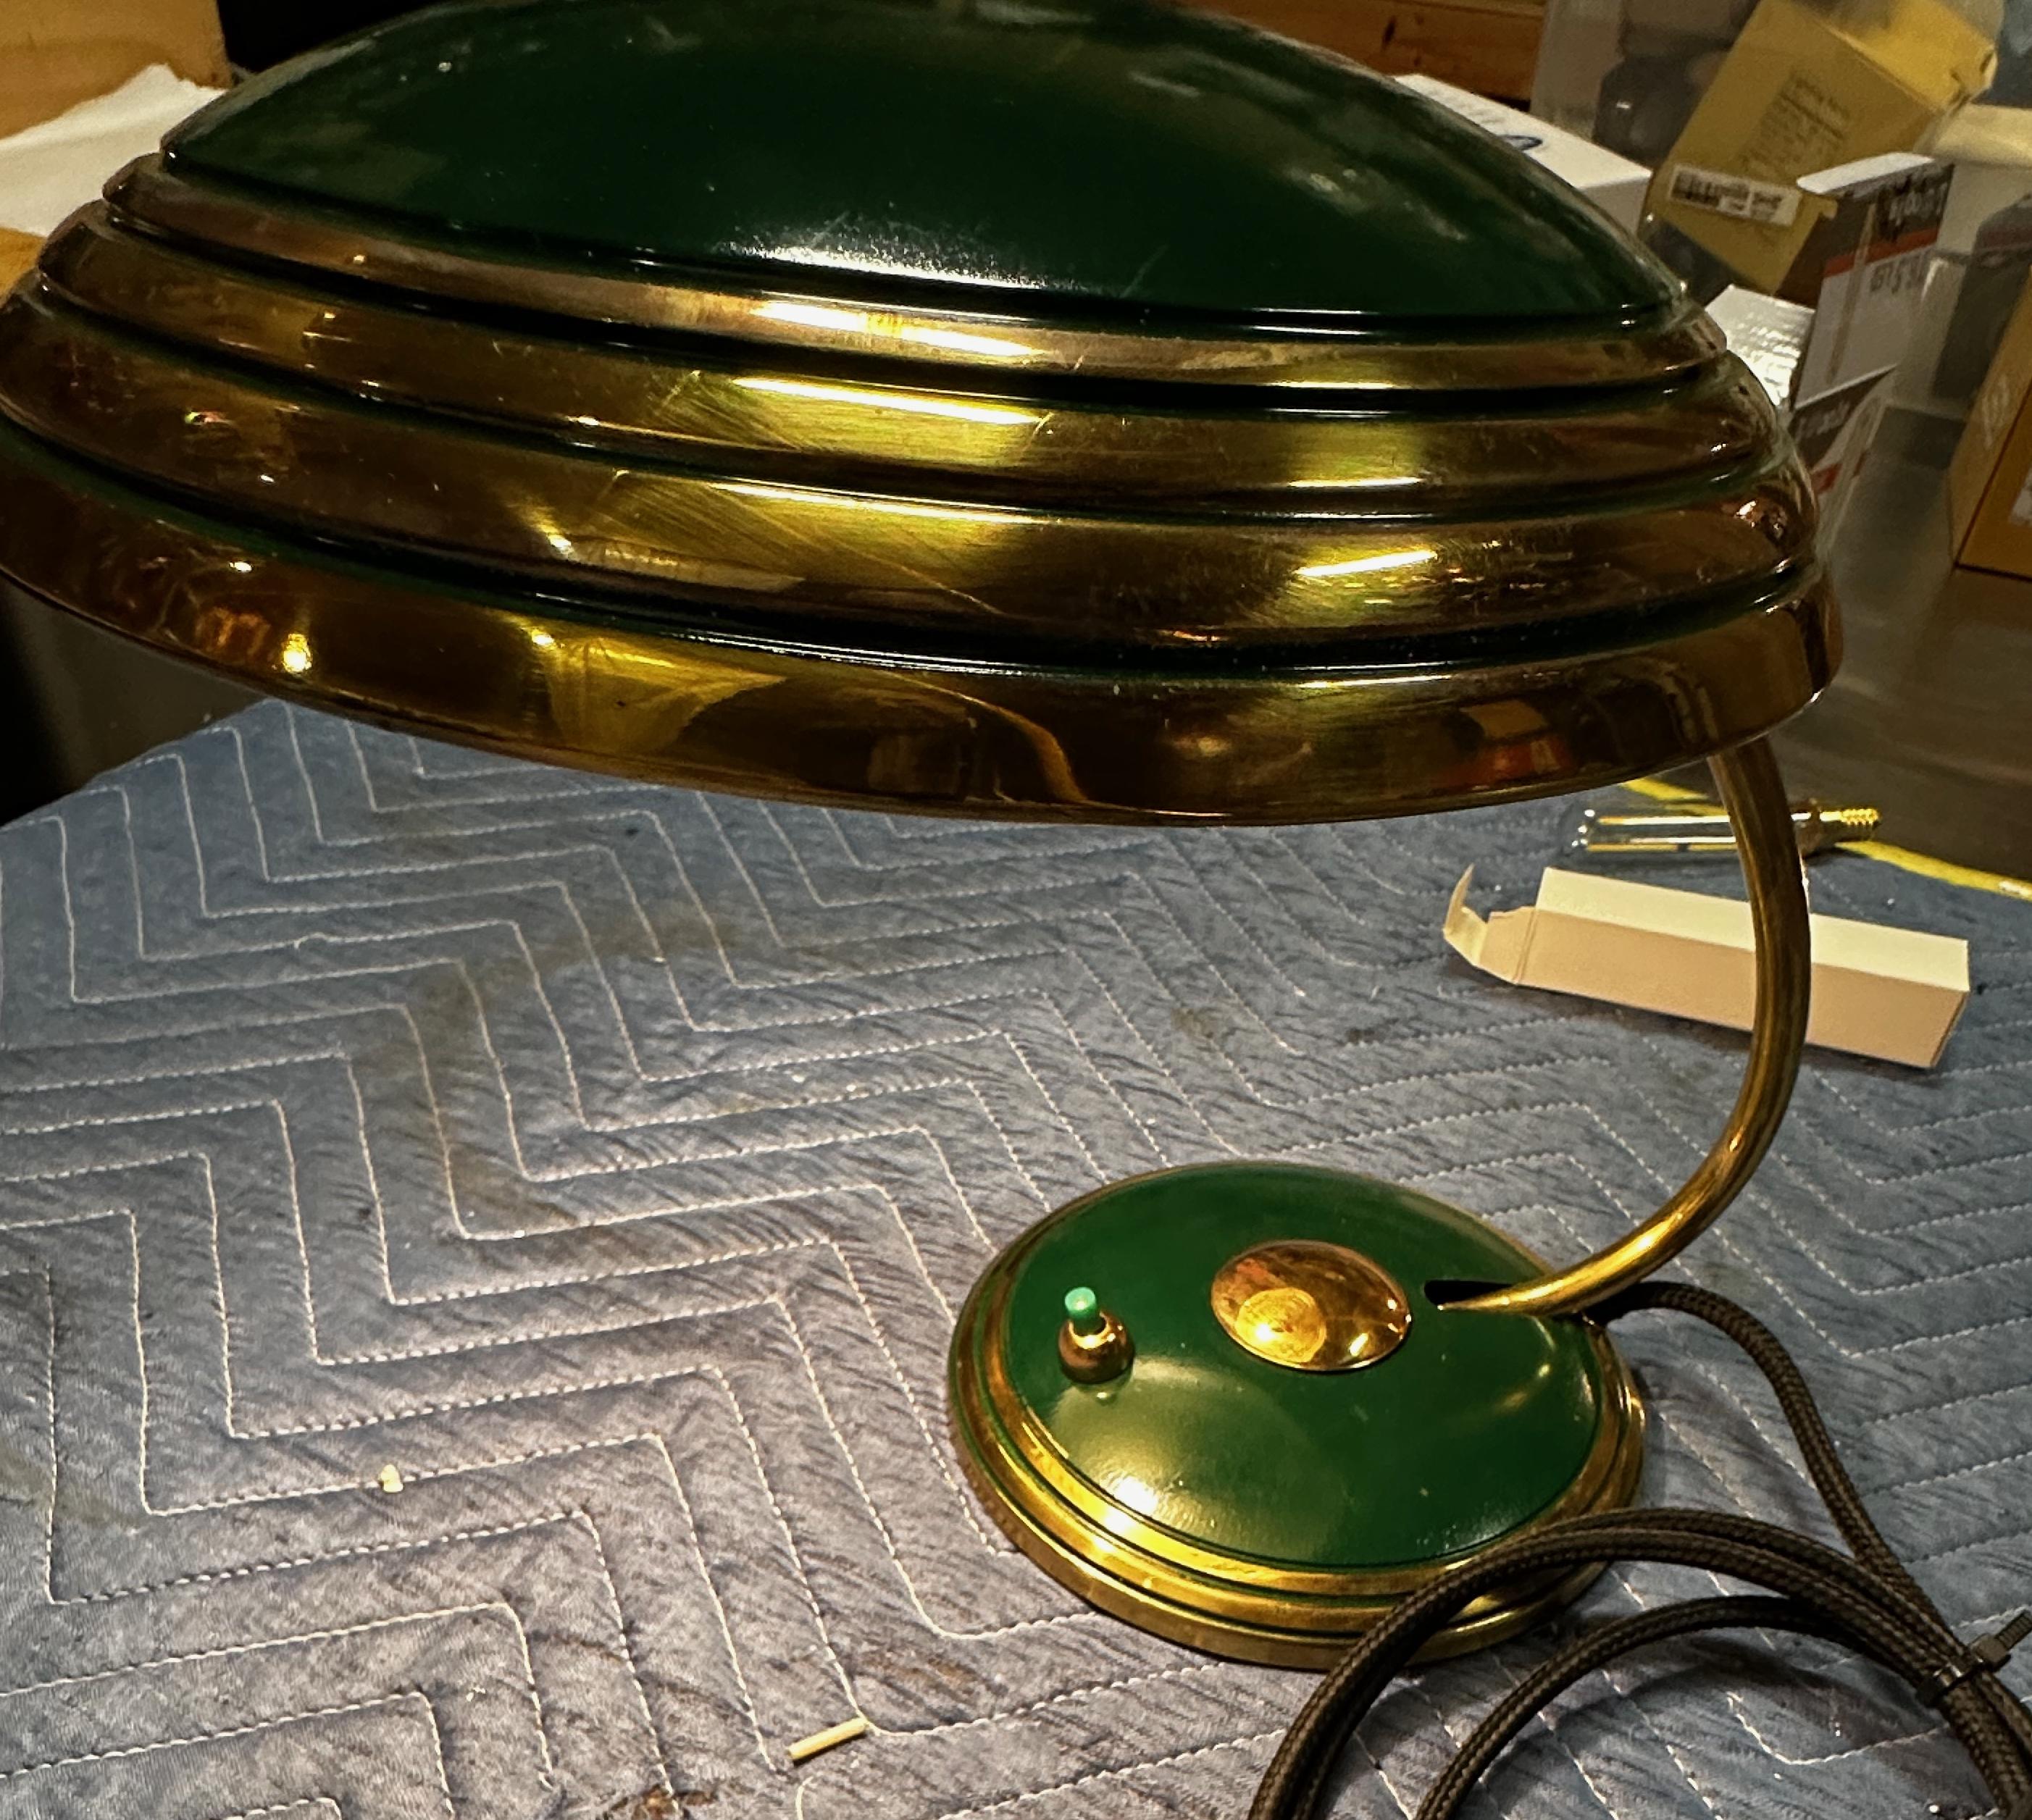 Mid-20th Century Modernist Art Deco Enamel Green and Brass Table Lamp For Sale